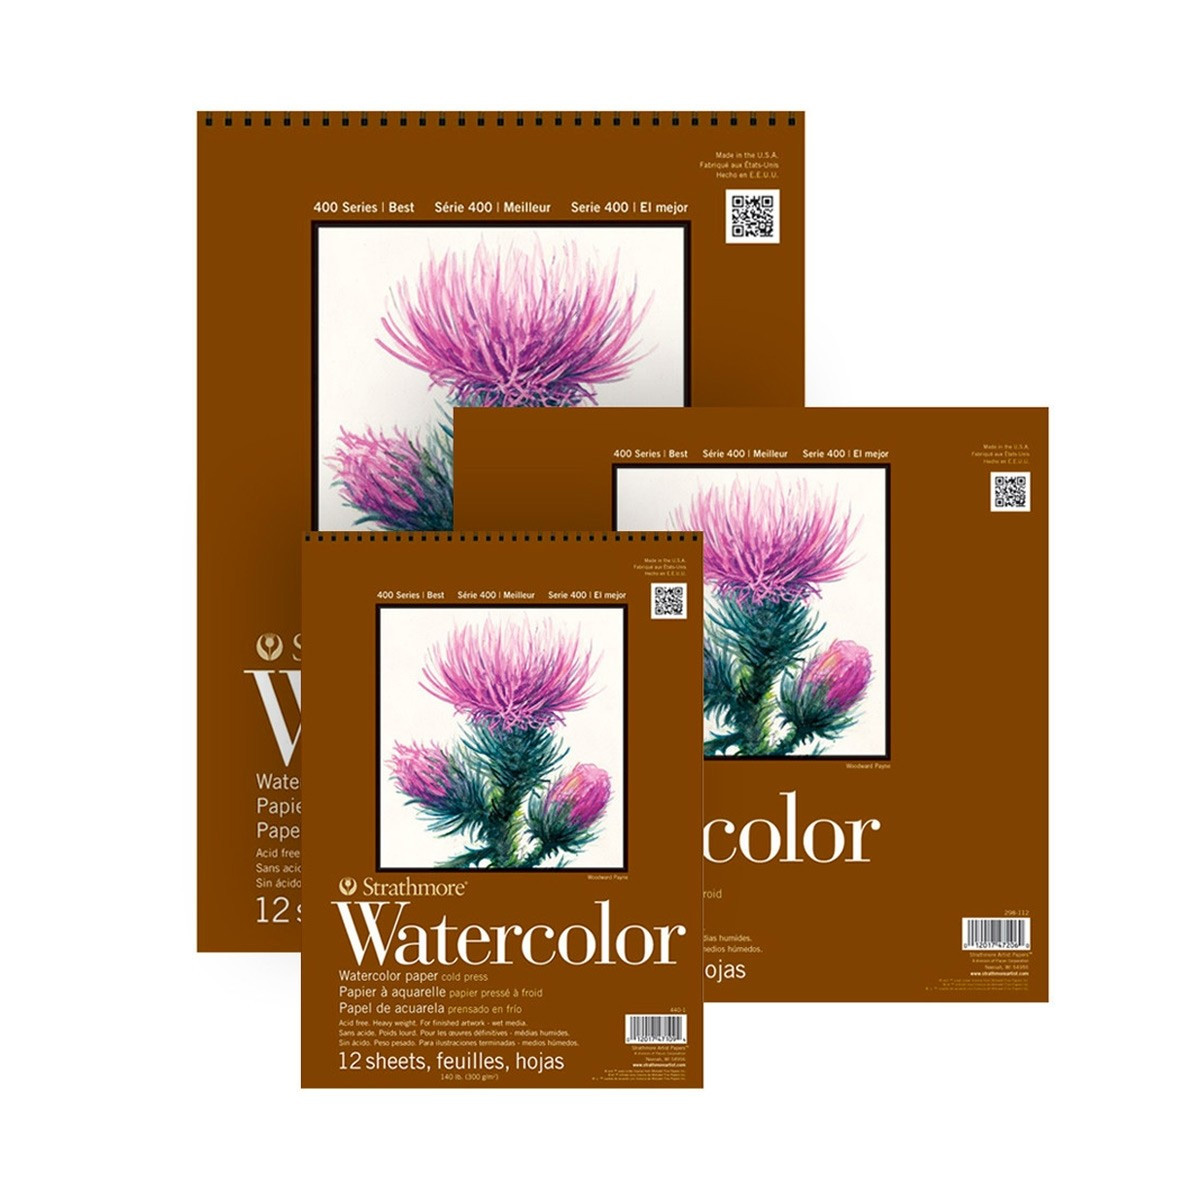 140 lb. Strathmore Watercolor Paper -Bulk Packed- two sizes 11x15 & 15x22 •  PAPER SCISSORS STONE